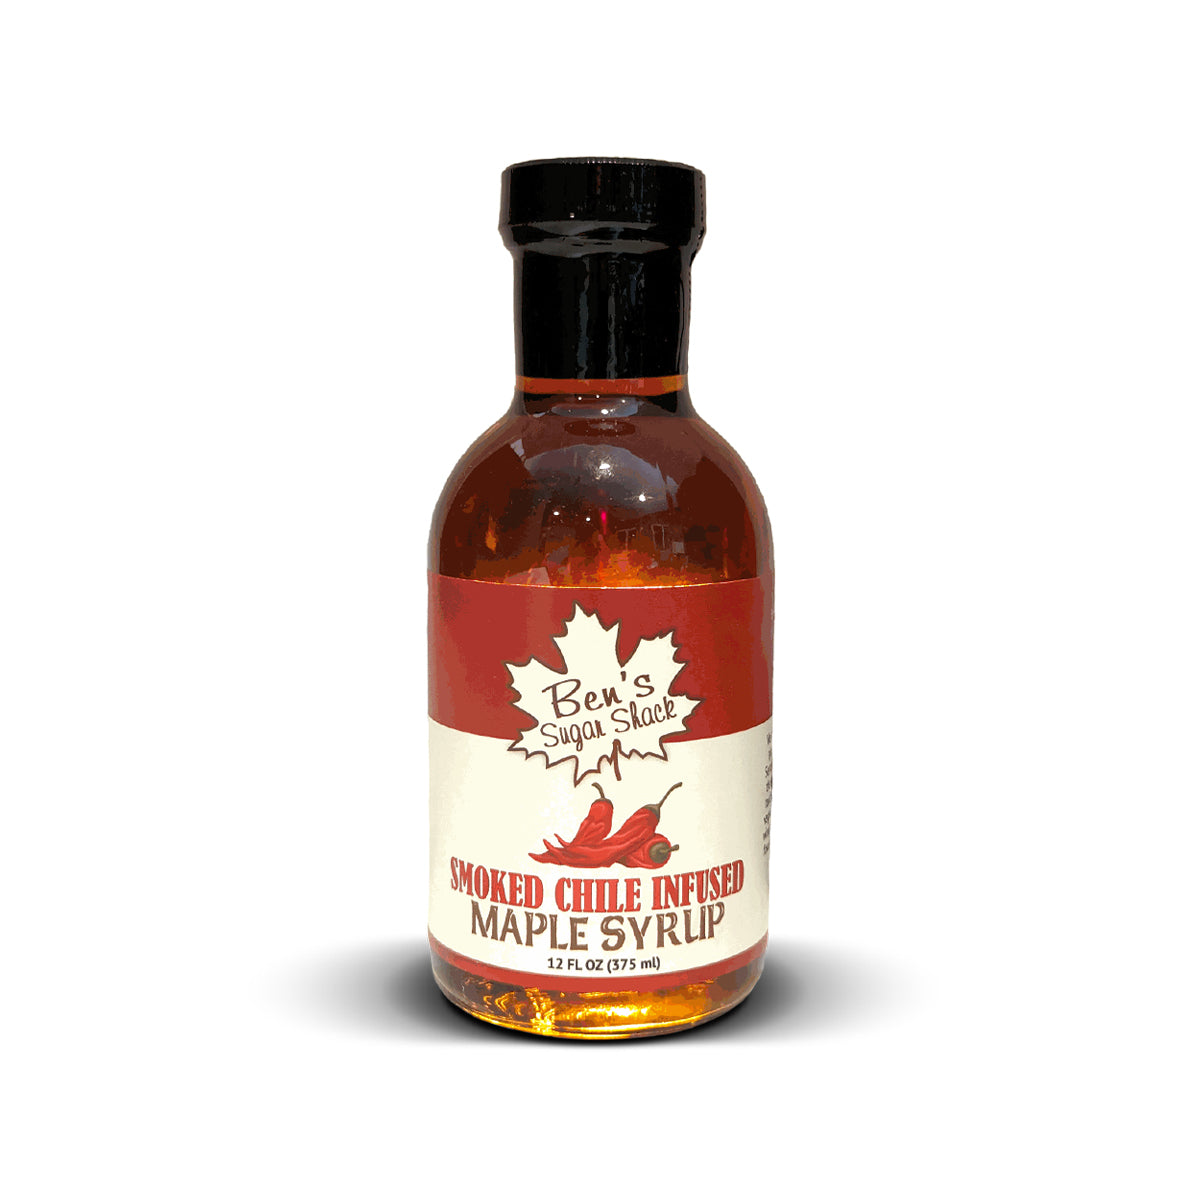 Smoked Chile Infused Maple Syrup 12 oz